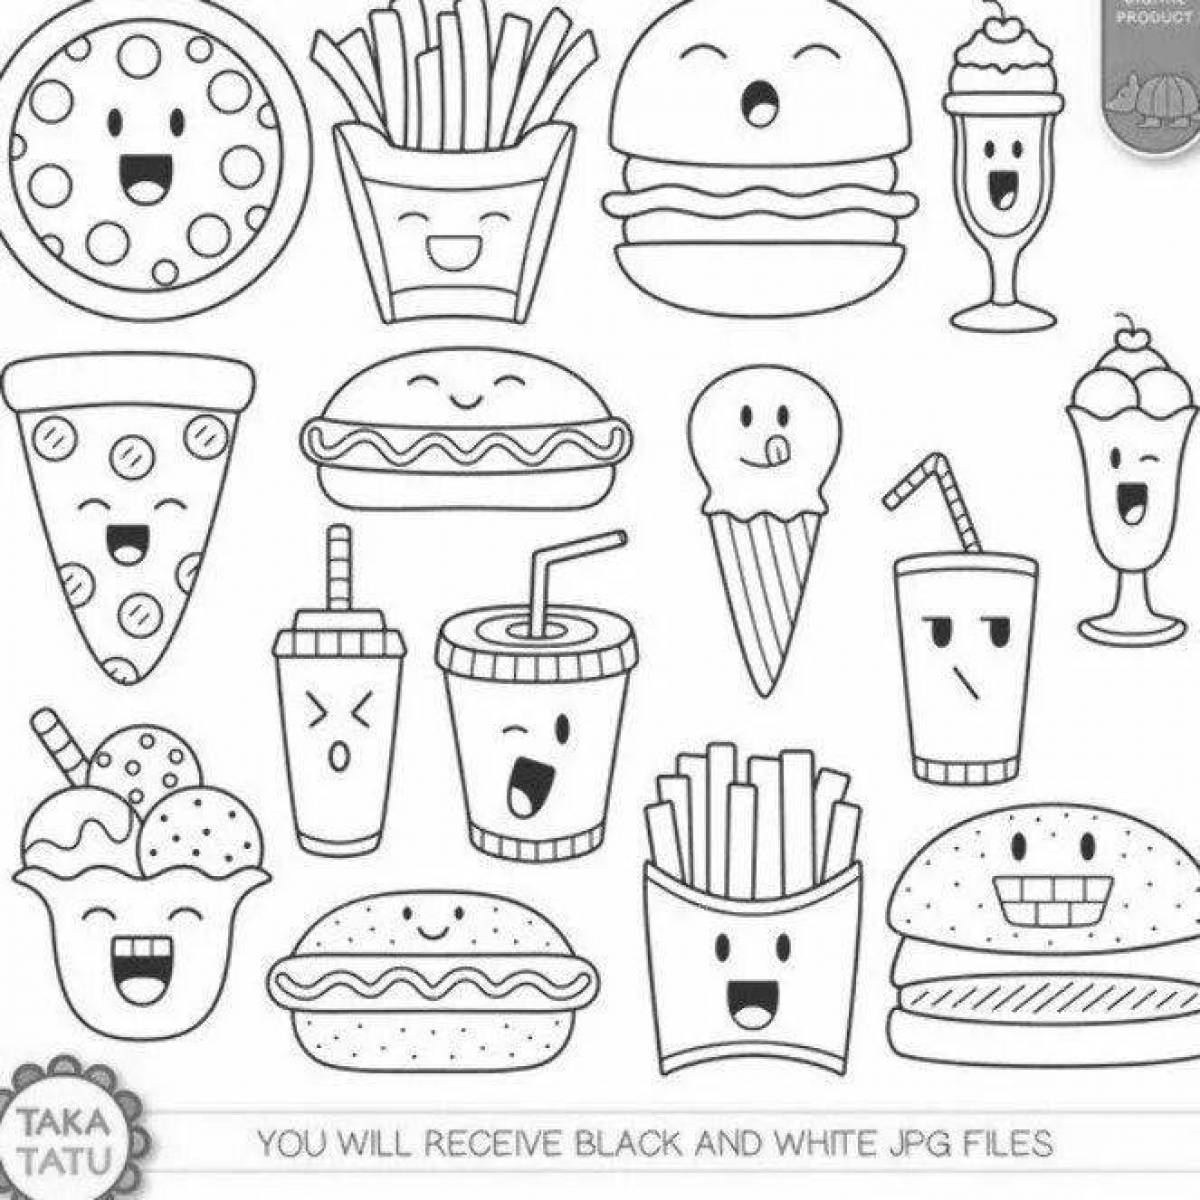 Fabulous food stickers coloring book